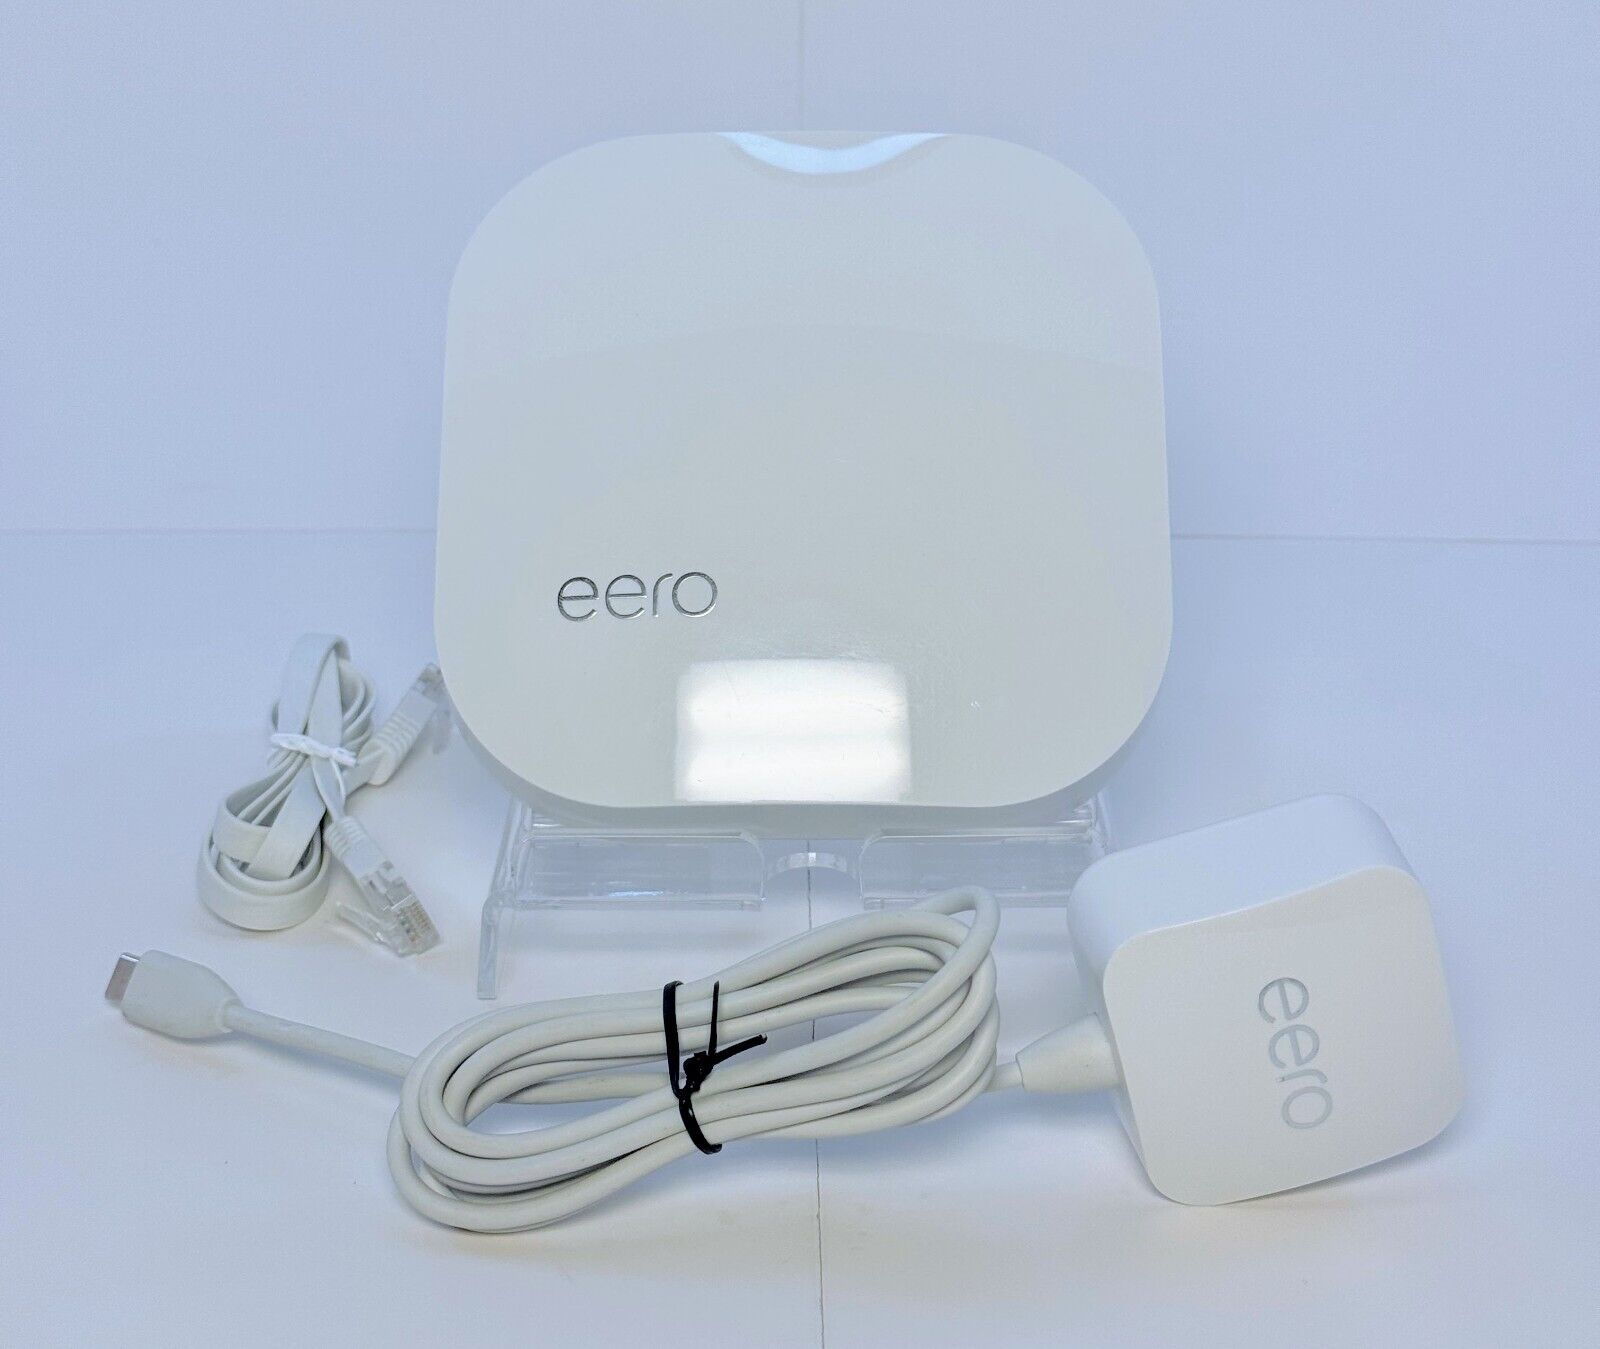 Eero B010001 Pro 2nd Generation Tri-Band AC Home Mesh WiFi Router w/ OEM Adapter